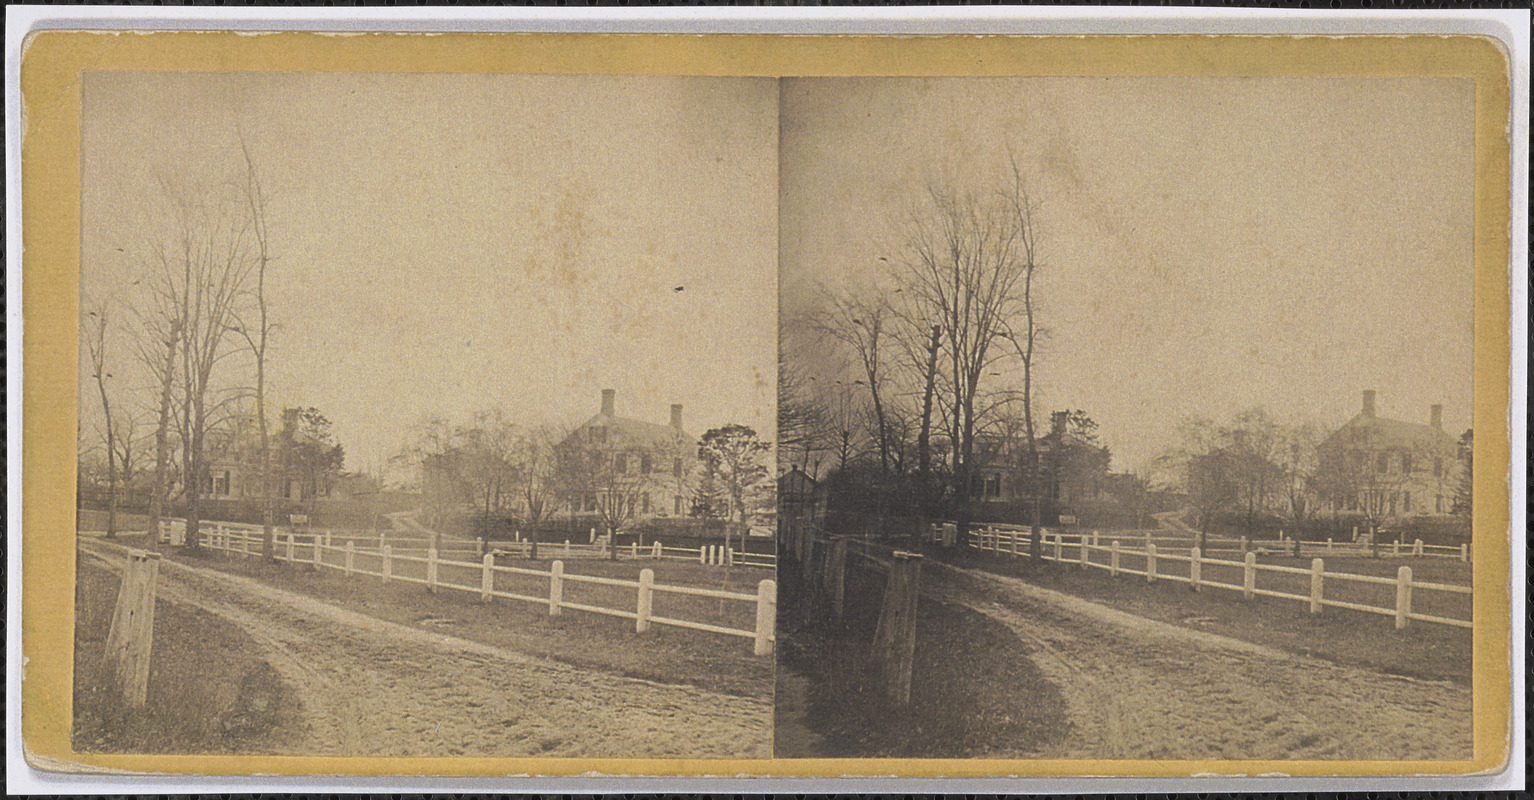 11 Strawberry Lane, house of H. C. Thacher and Captain Bangs Hallett, seen from the common looking south west, Yarmouth Port, Mass.